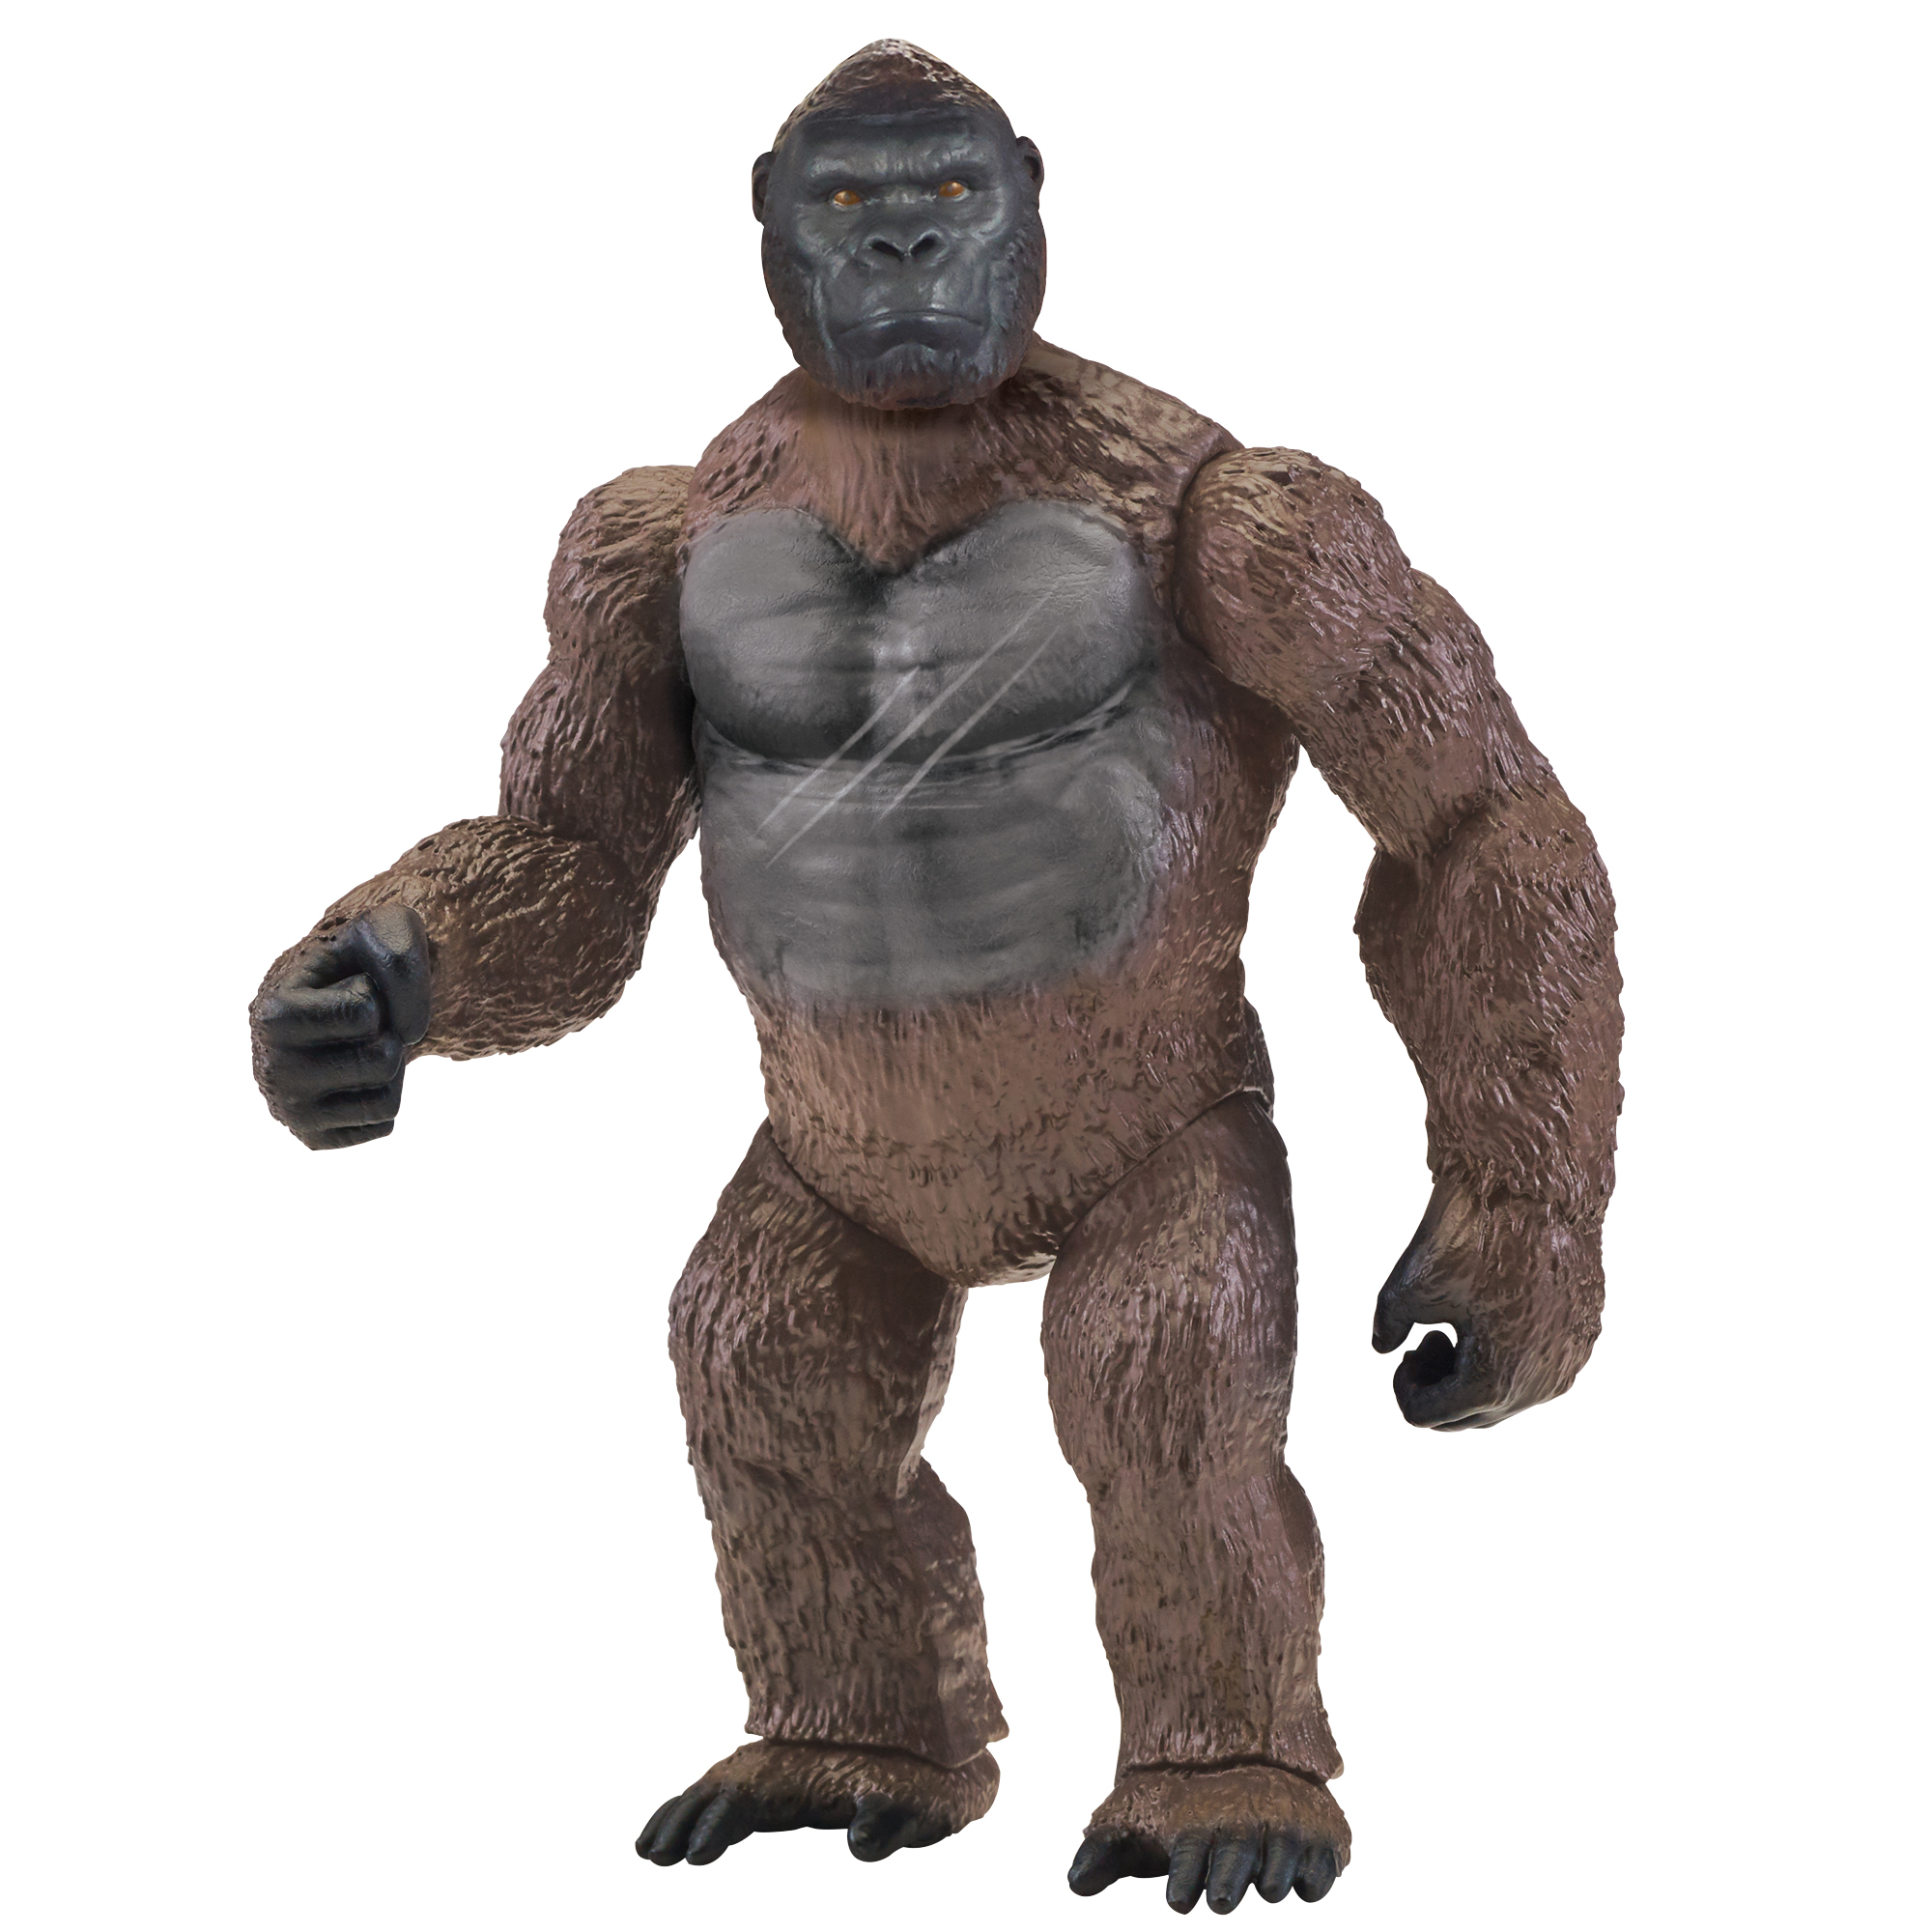 2020 Playmates Toys King Kong Skull Island 11" Action Figure 35593 for sale online